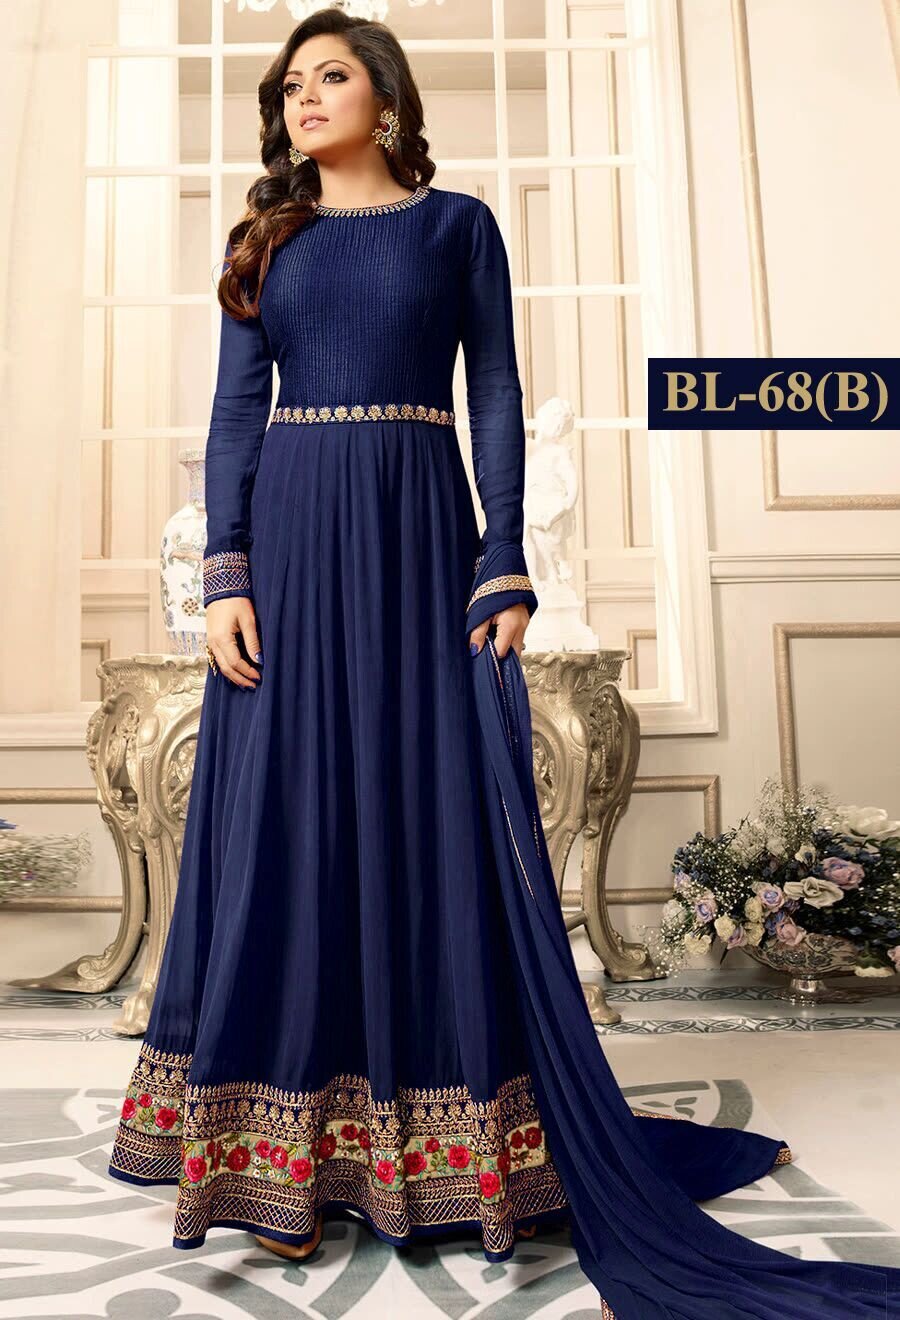 Admiring Navy Blue With Floral Embroidery Anarkali Suit